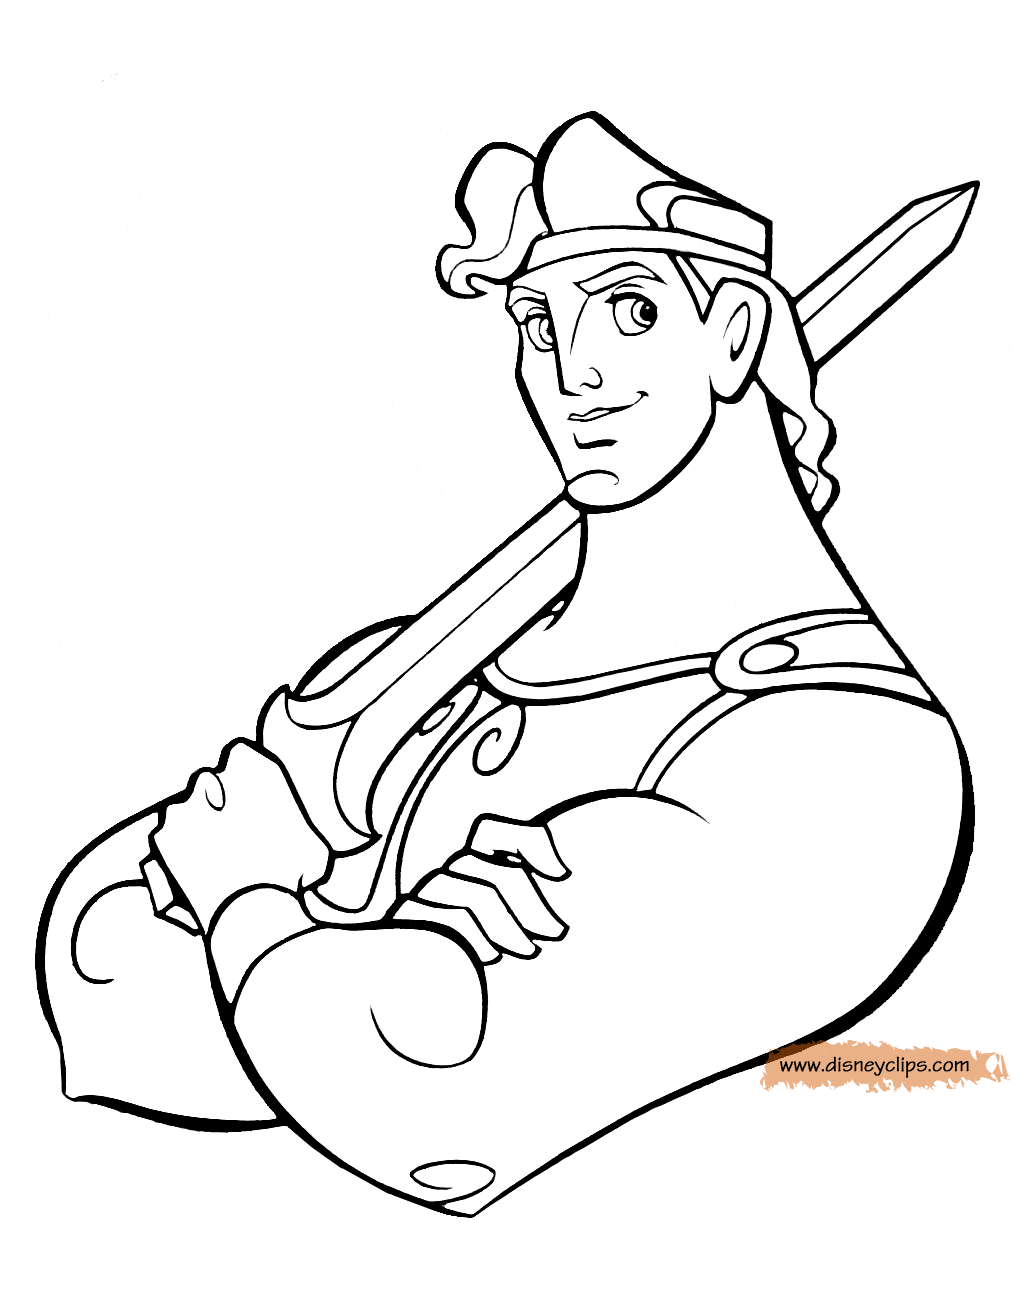 coloring page Hercules with sword